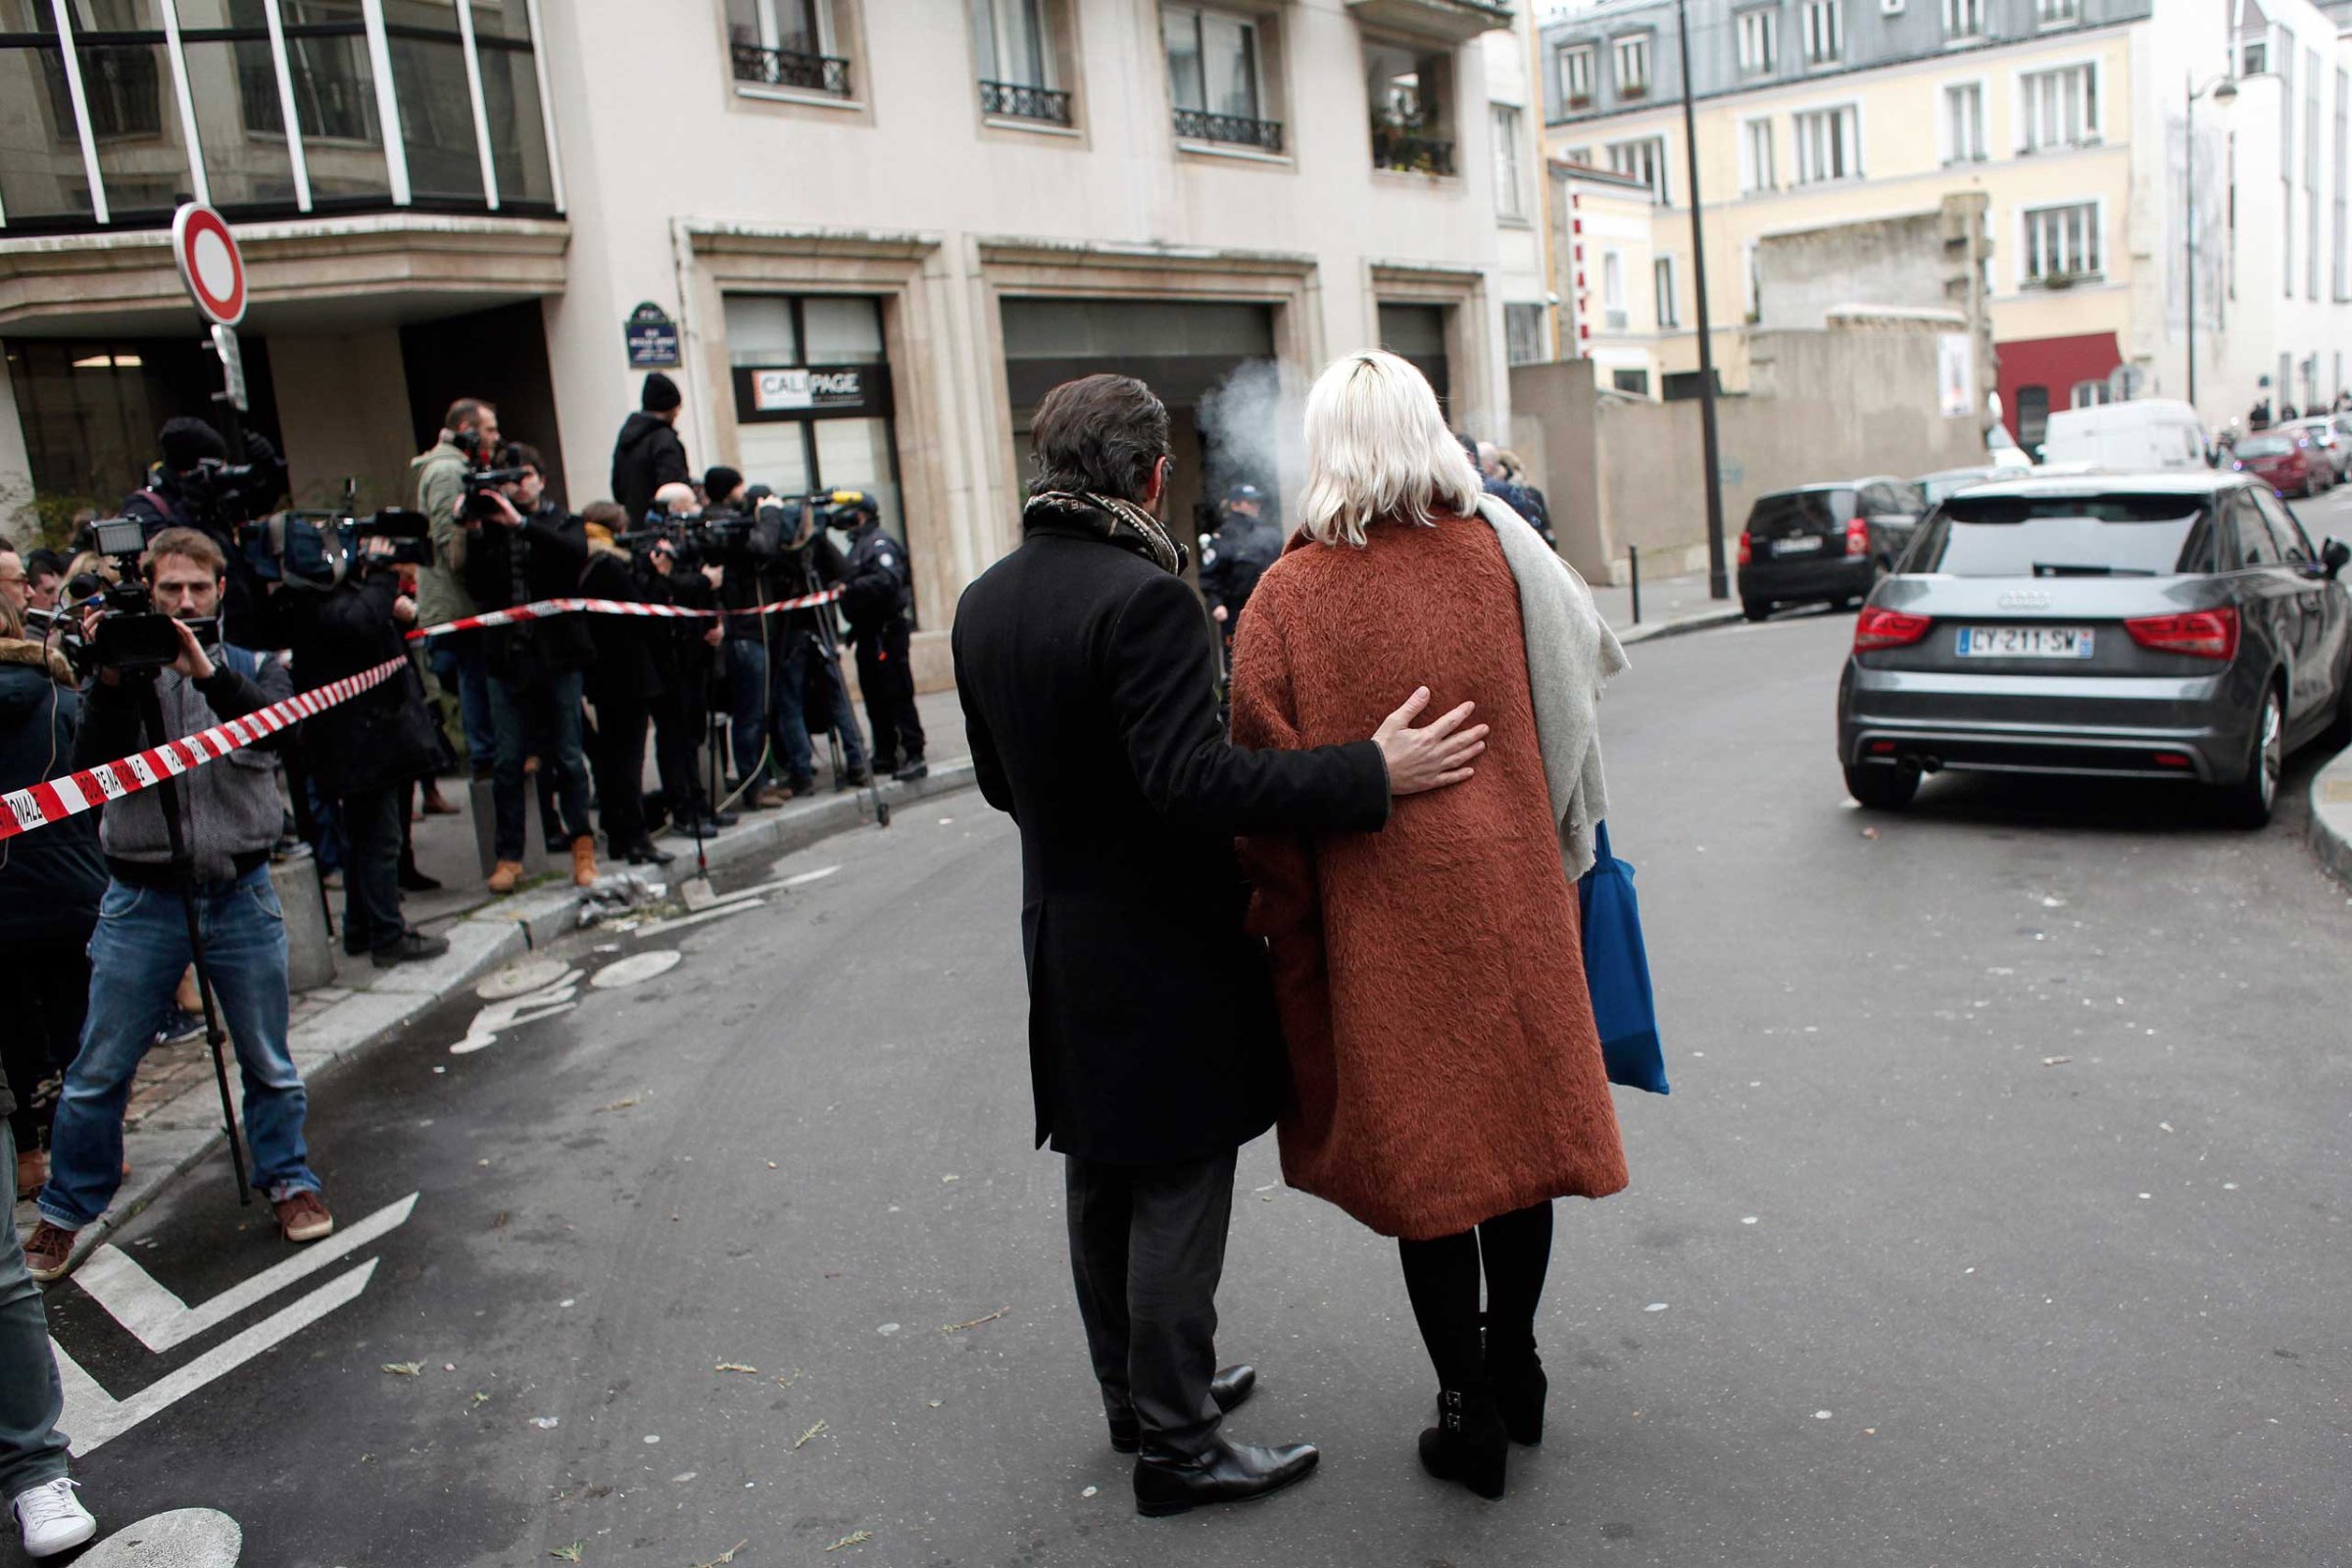 People stand outside the French satirical newspaper Charlie Hebdo's office after a shooting, in Paris, Jan. 7, 2015.